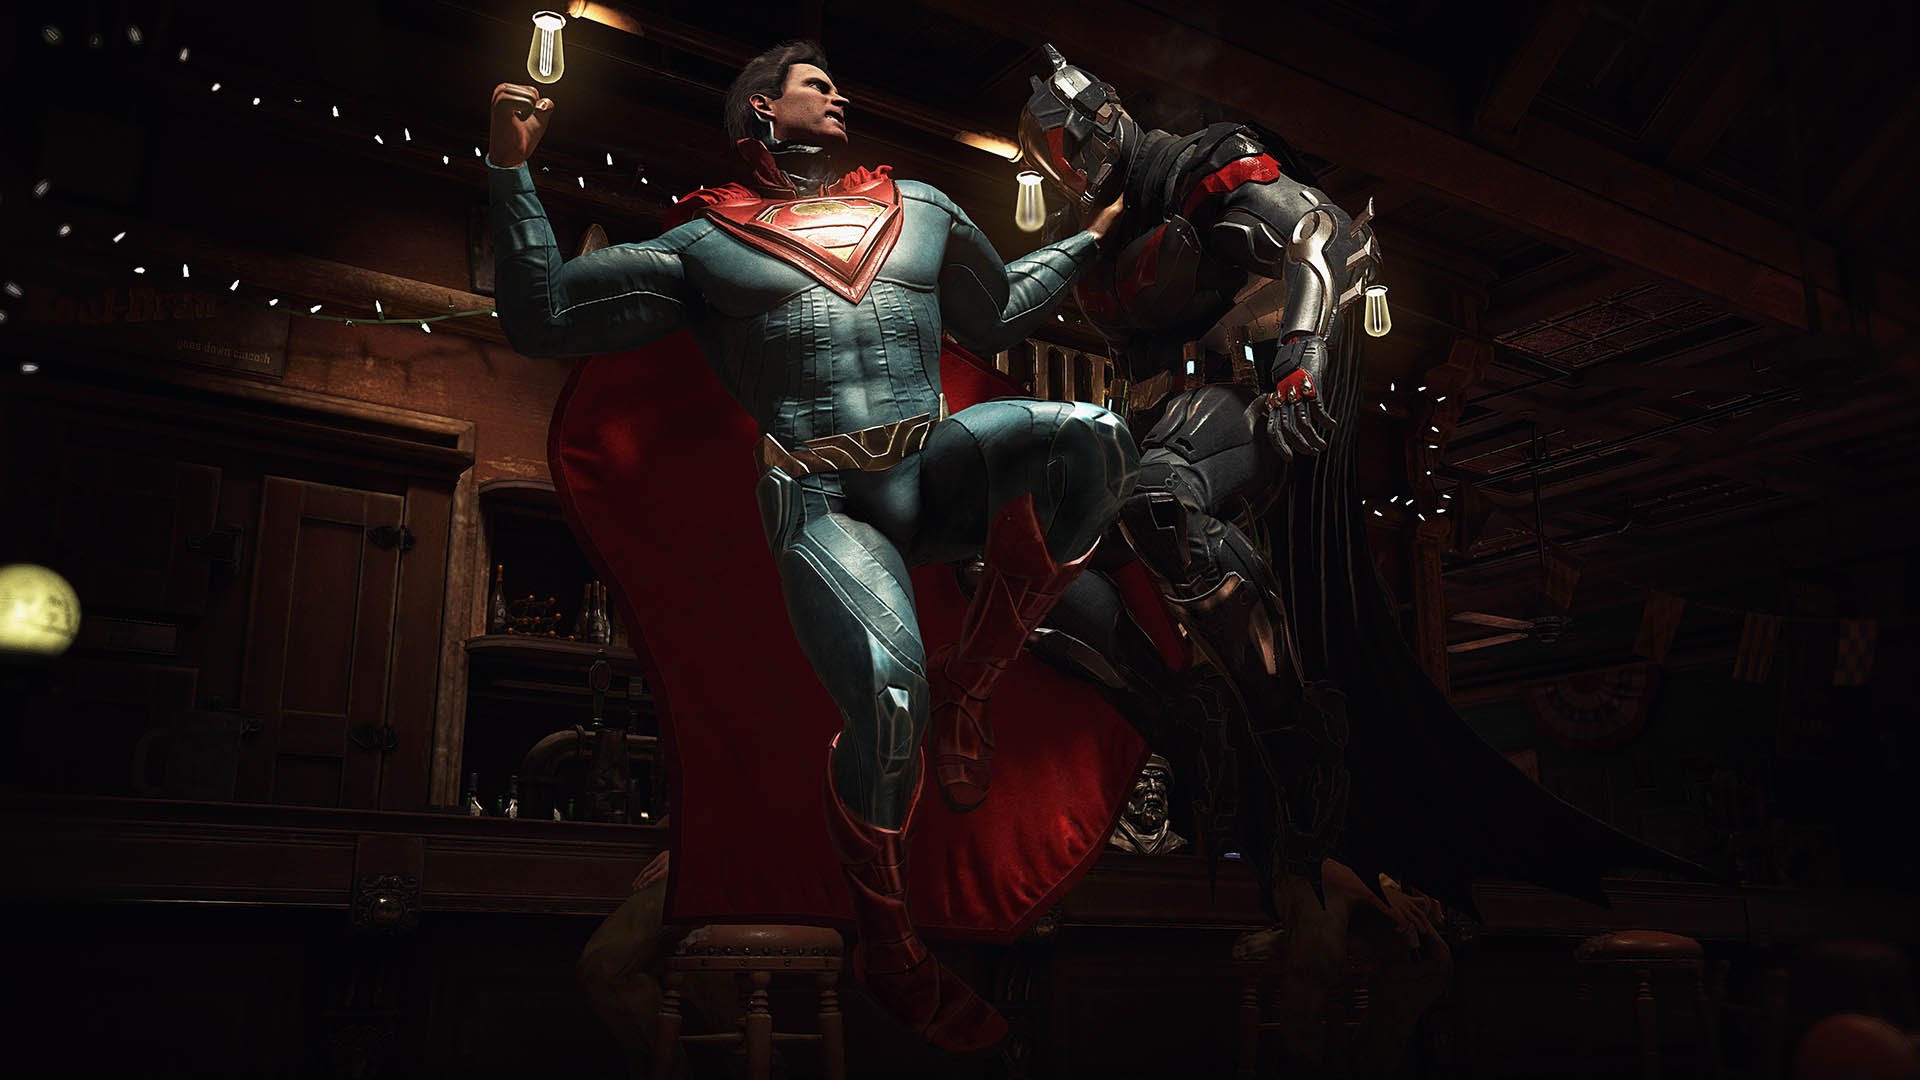 Injustice 2 (PS4 / PlayStation 4) Game Profile | News, Reviews, Videos